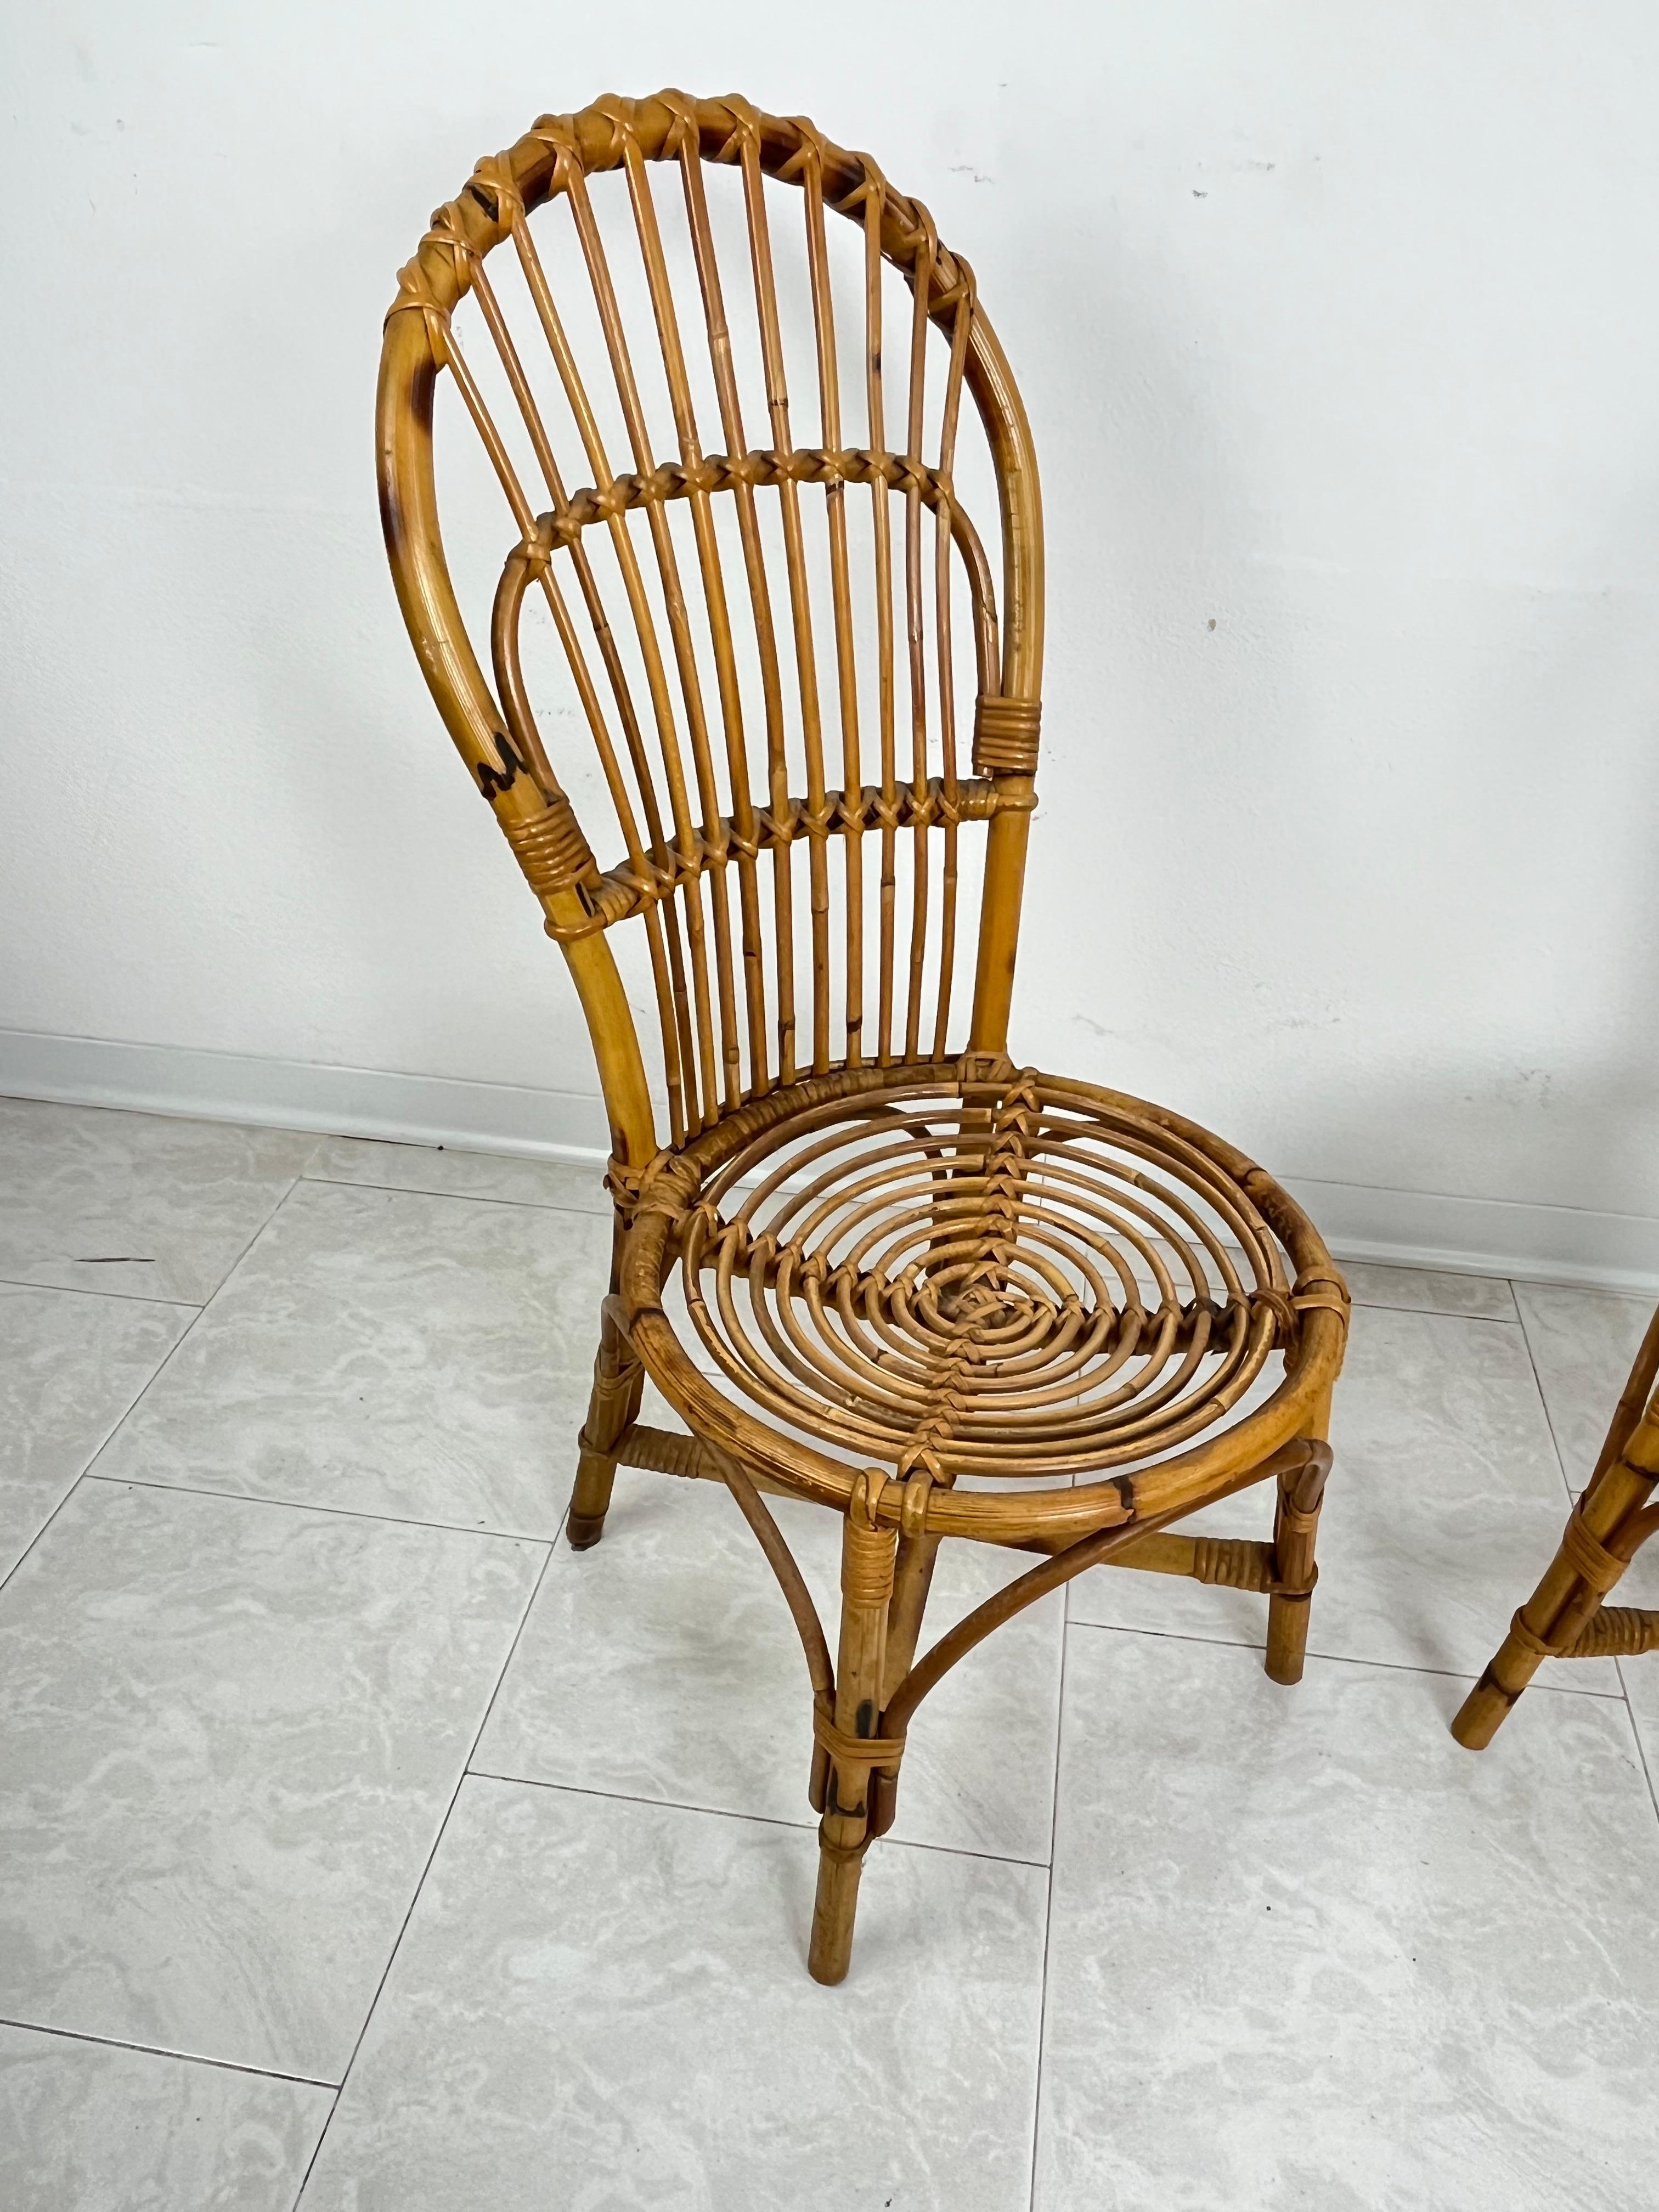 Set of 2 Small Mid-Century Bamboo Chairs, Italian Design 1950s For Sale 2